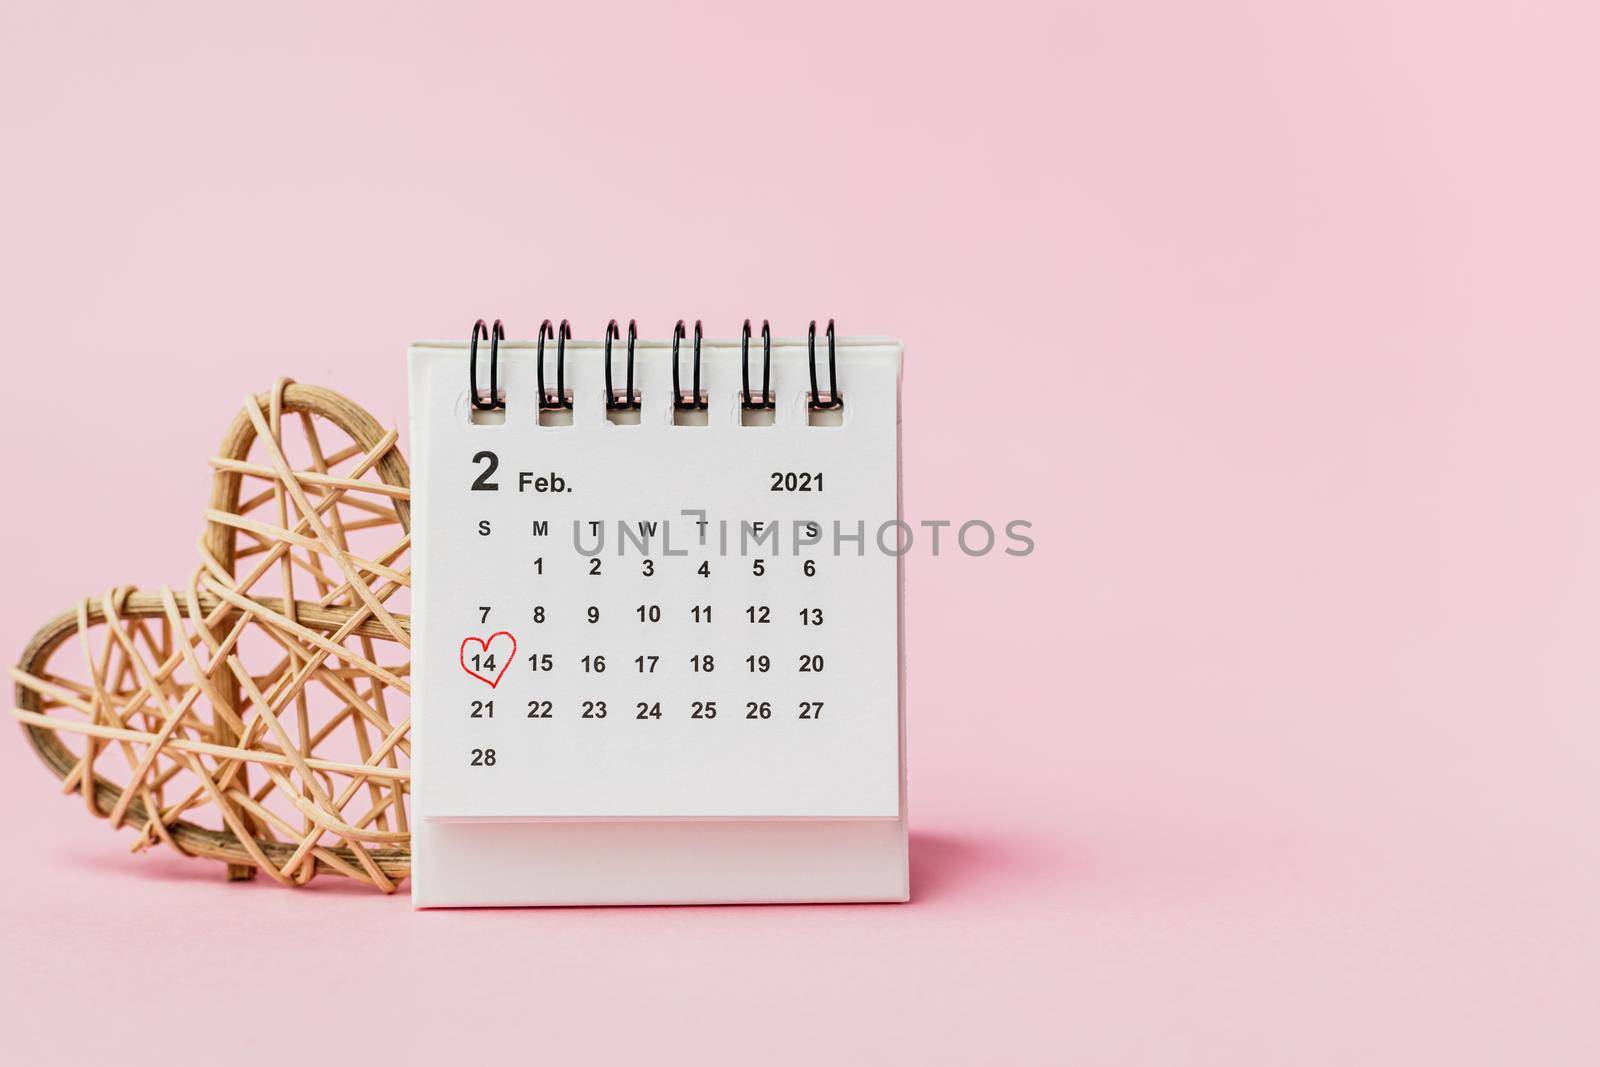 Calendar with red heart shaped marking on date February, 14 by iamnoonmai